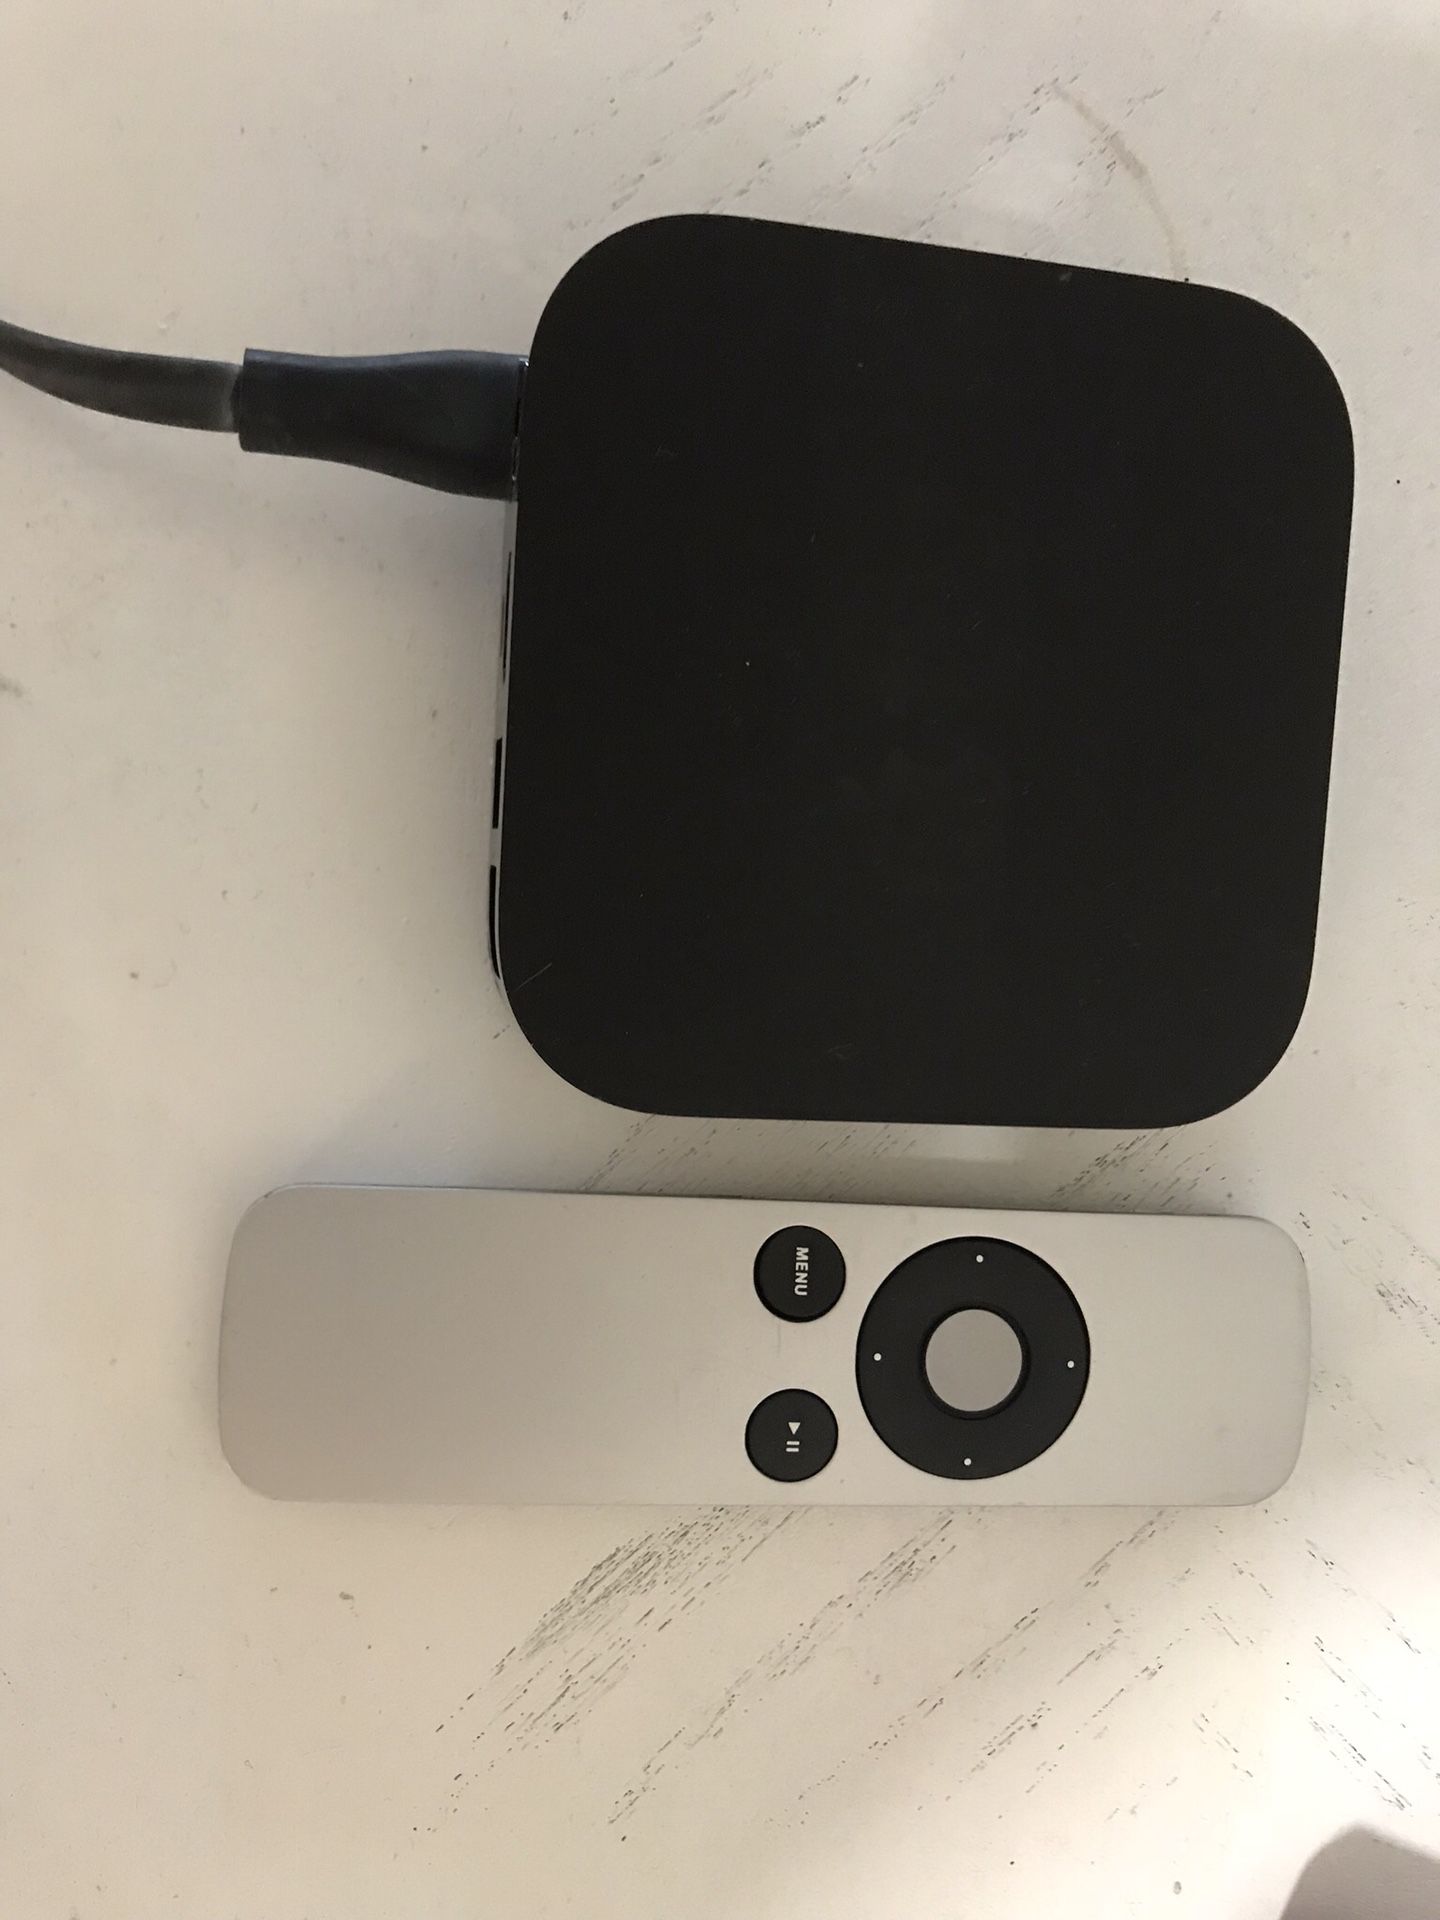 Apple TV with cord and working replacement remote